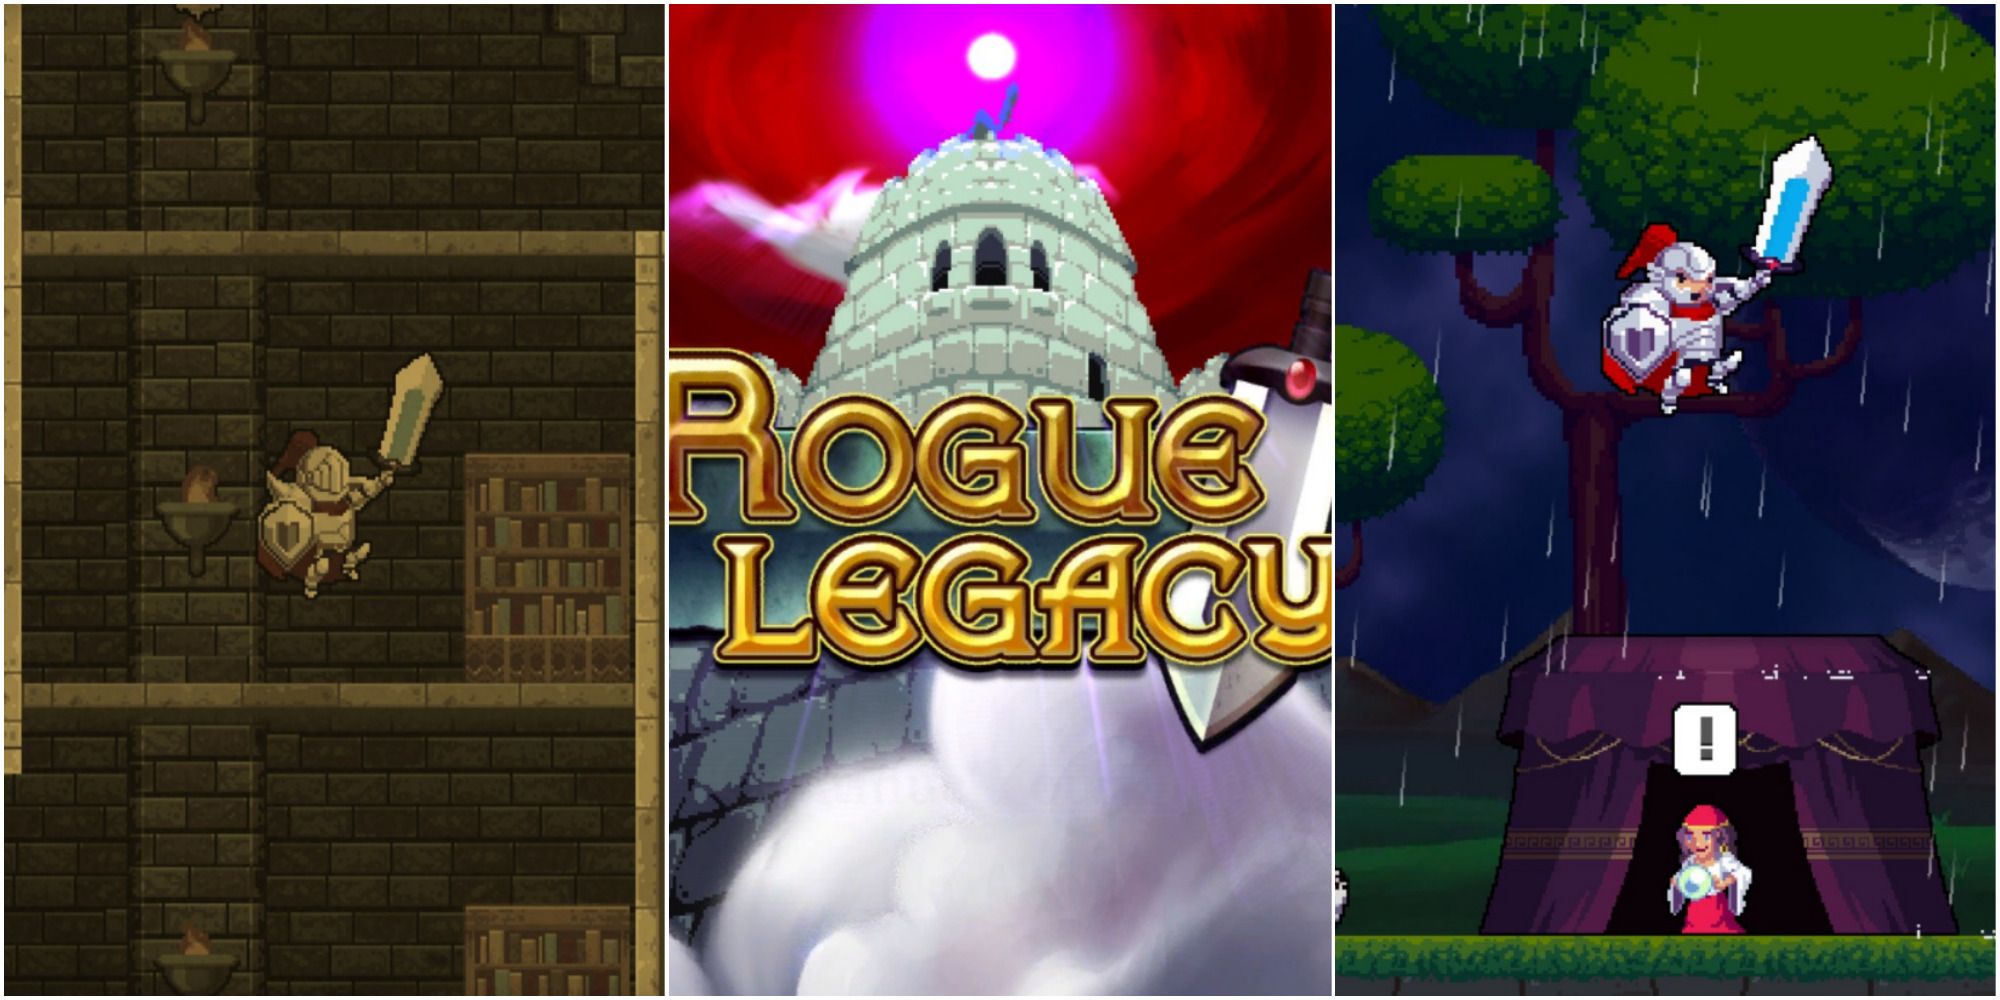 rogue legacy knight jumping in castle, rogue legacy title screen with castle and clouds, knight with sword jumping over NPC